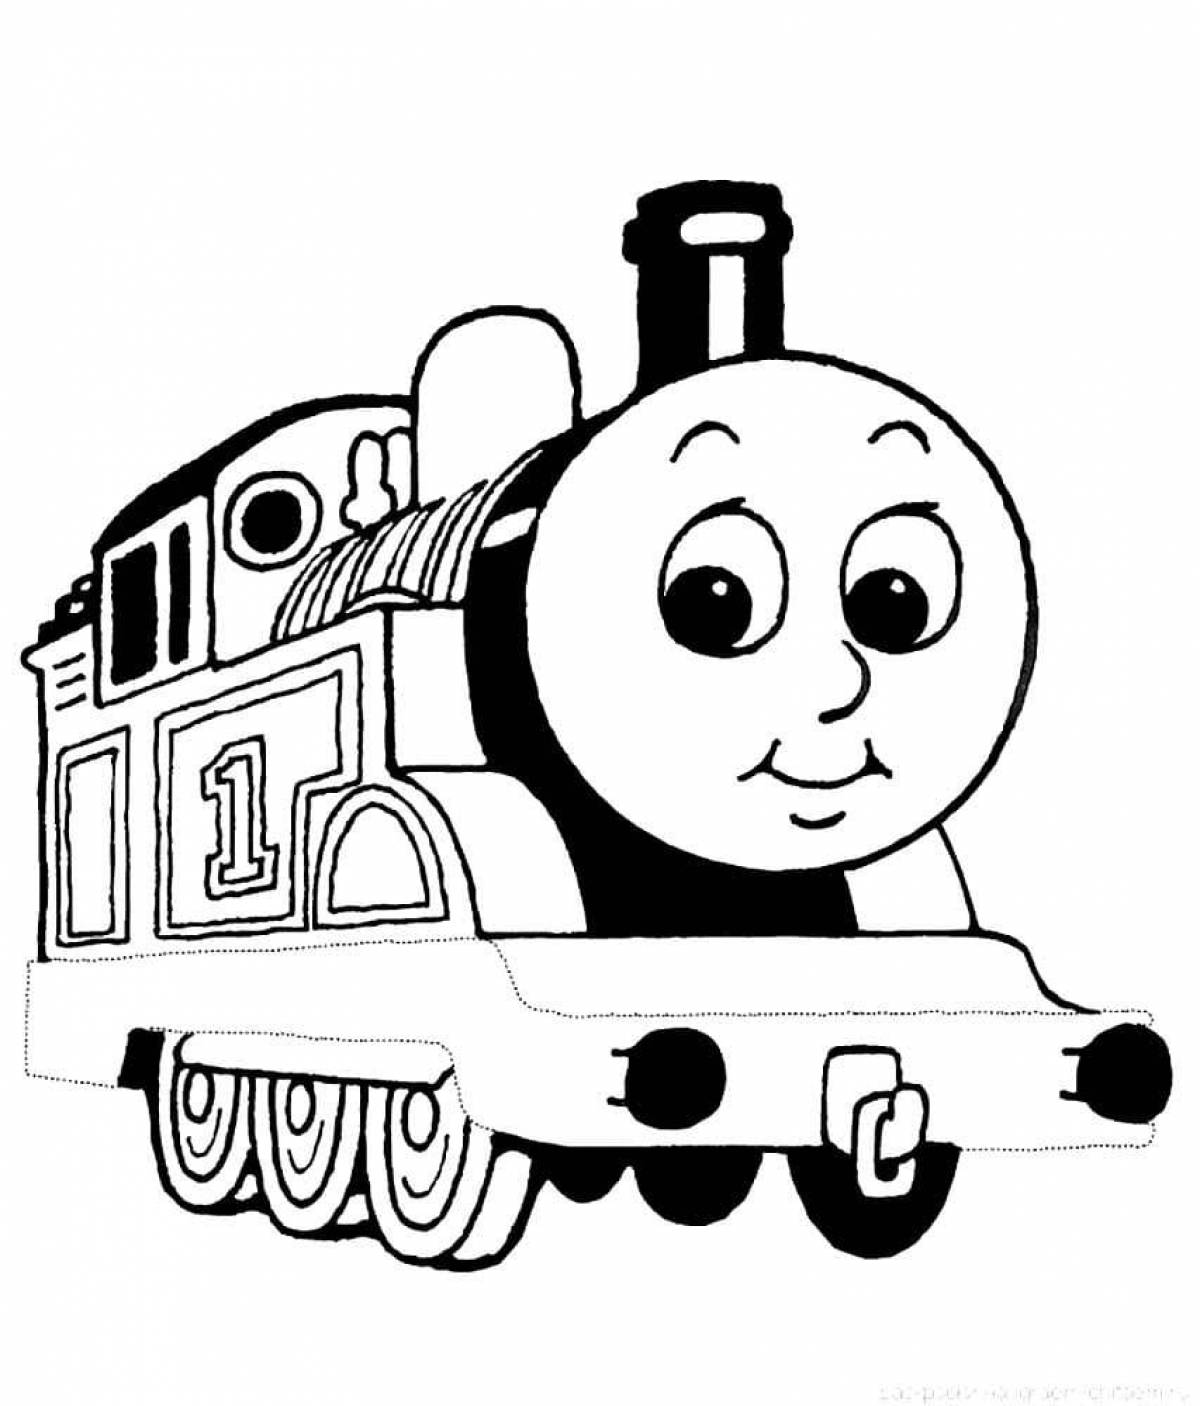 Thomas and friends #15